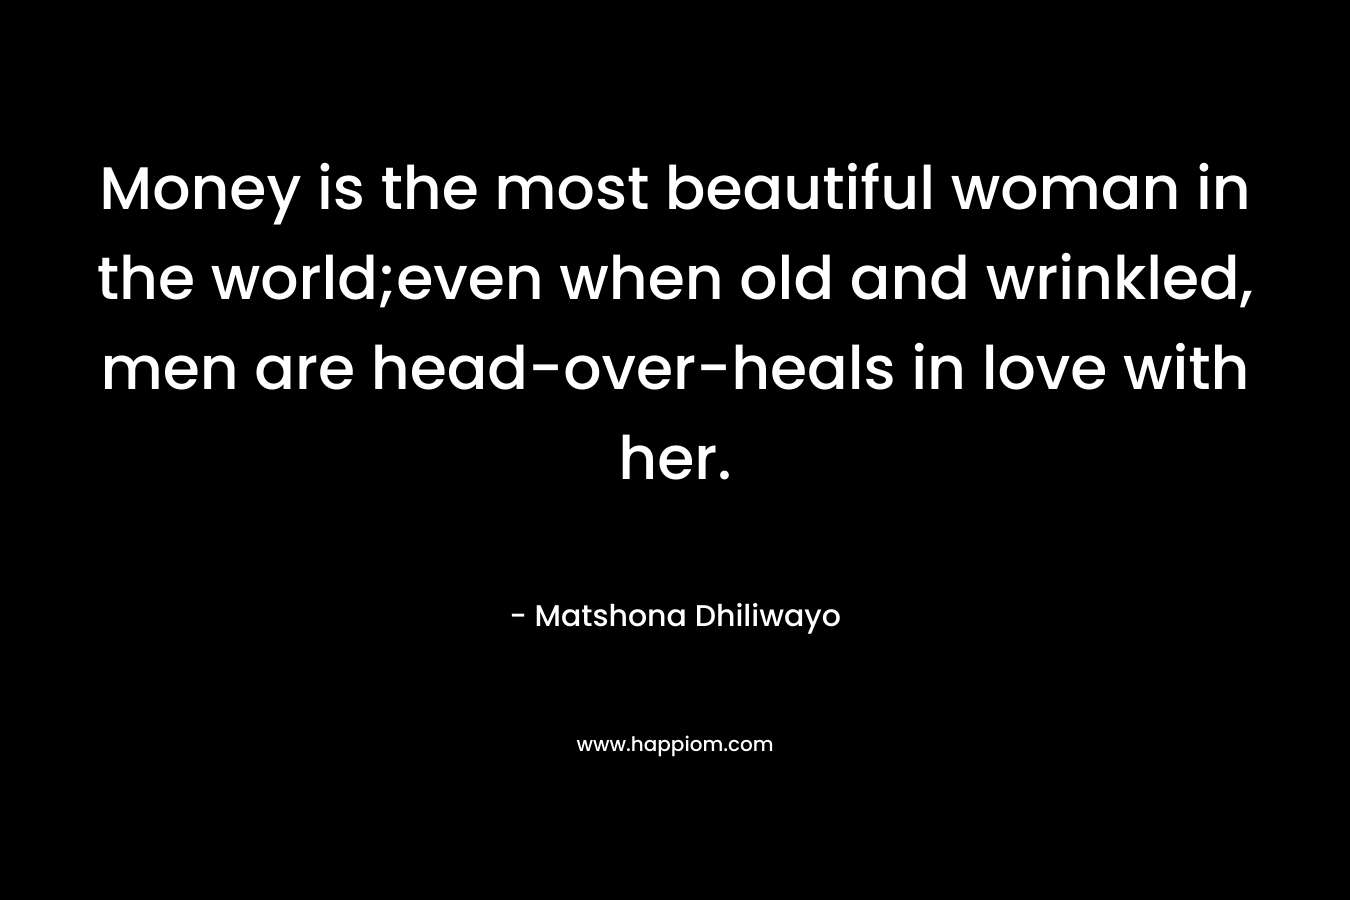 Money is the most beautiful woman in the world;even when old and wrinkled, men are head-over-heals in love with her. – Matshona Dhiliwayo